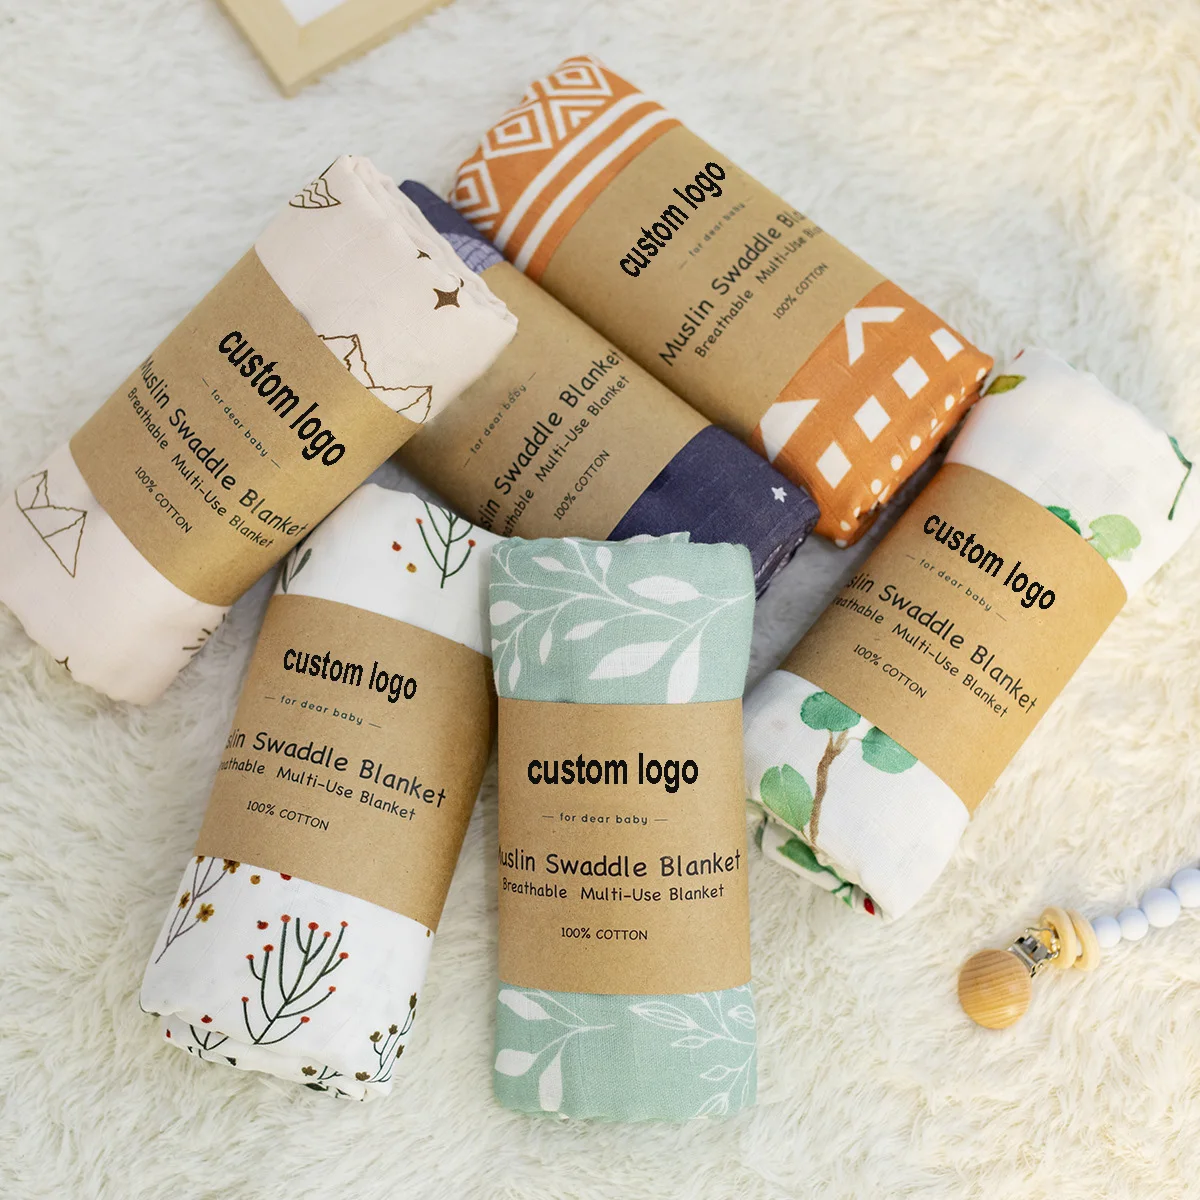 New Fashion Customizable Cute Printed Soft 70% Bamboo 30% Organic Cotton Fabric Muslin Infant Baby Swaddle Wrap Blanket